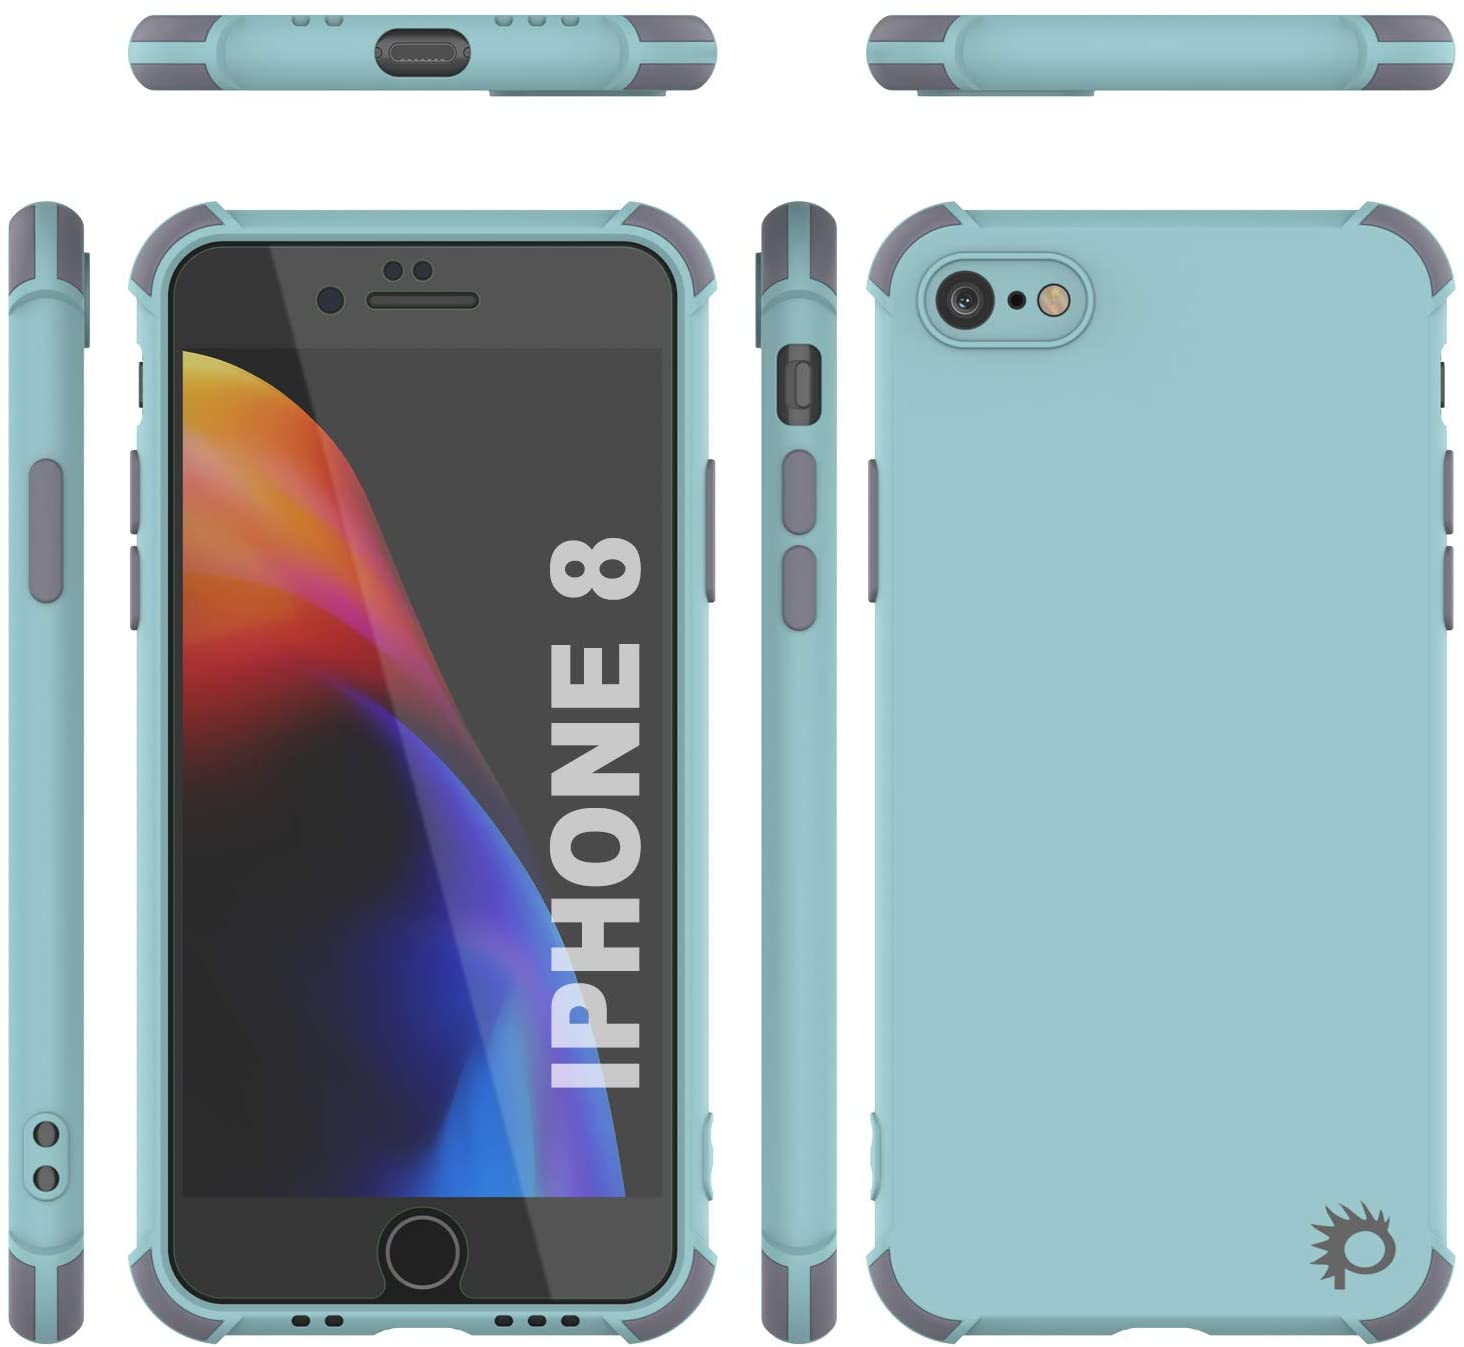 Punkcase Protective & Lightweight TPU Case [Sunshine Series] for iPhone 8 [Teal]